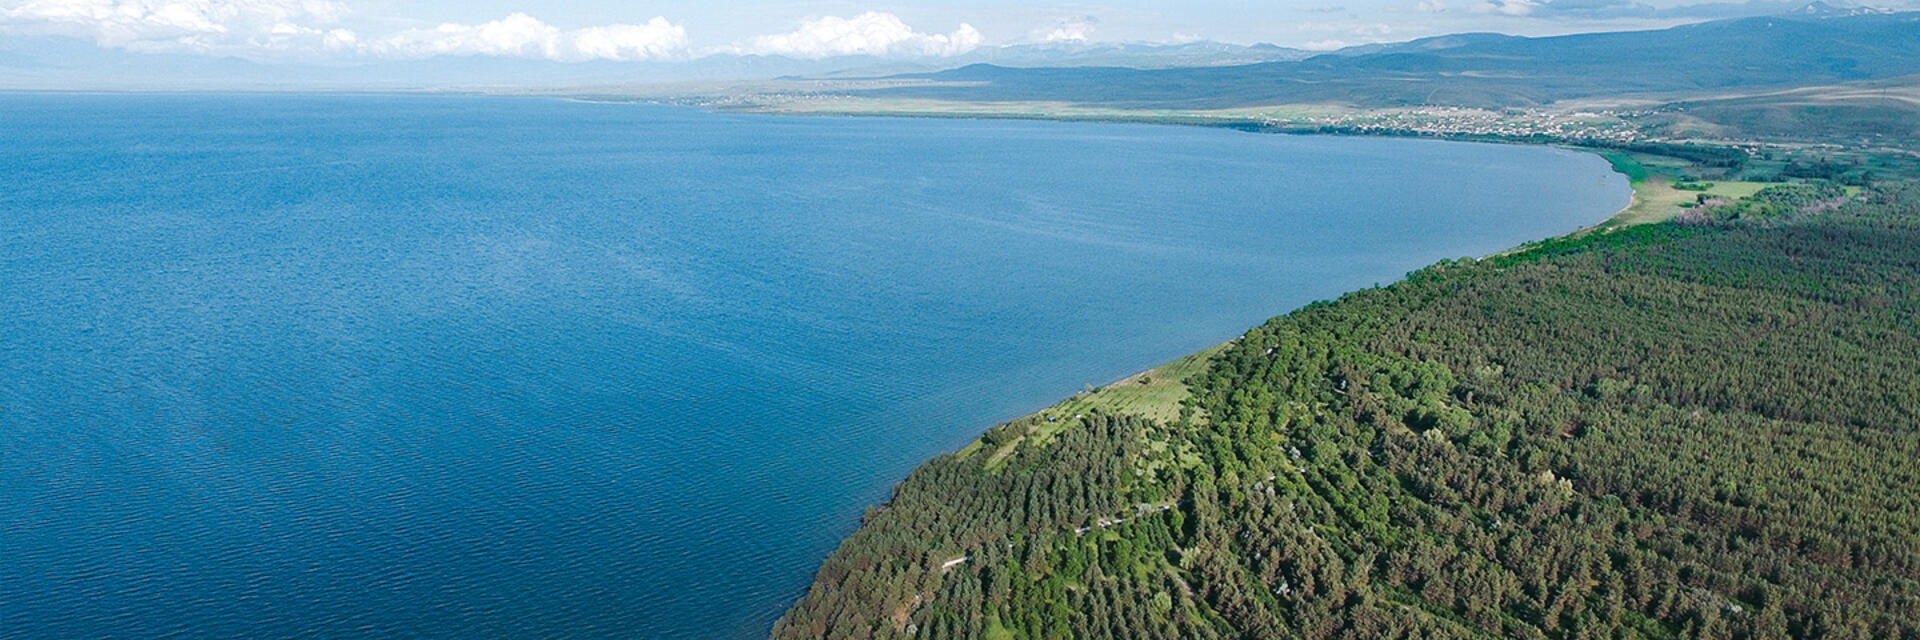 Lake Sevan, known for its beauty and mesmerizing colors, is one of the most famous alpine lakes in the world and a favorite destination for local and foreign visitors.